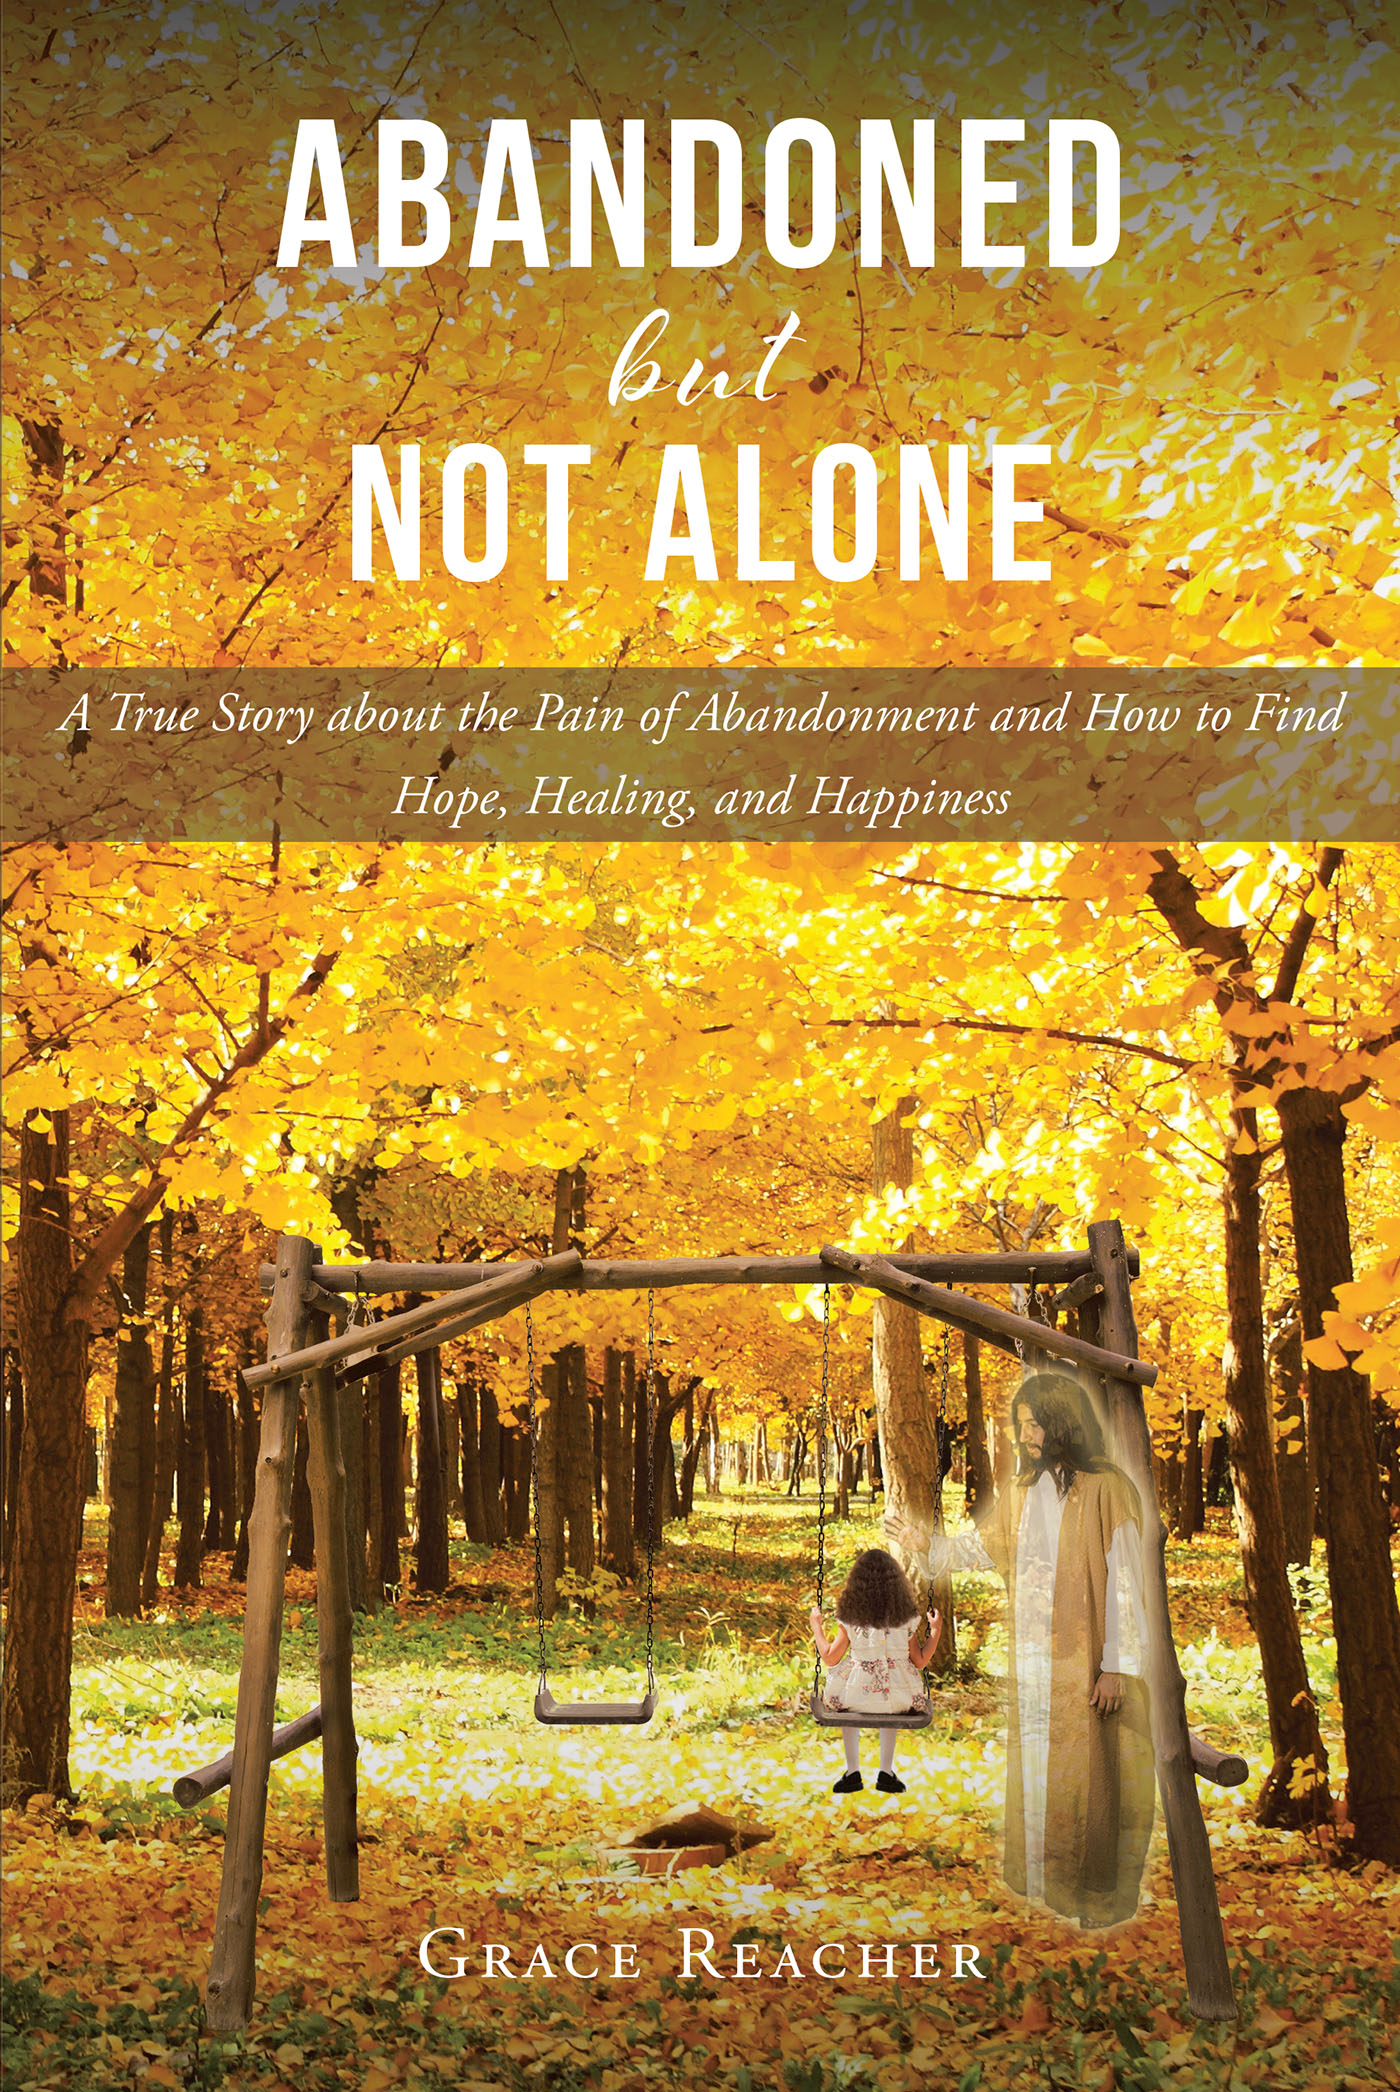 Author Grace Reacher’s Newly Released "Abandoned but Not Alone" Reveals How the Author's World Fell Apart and How She Pieced It Back Together Through Her Faith